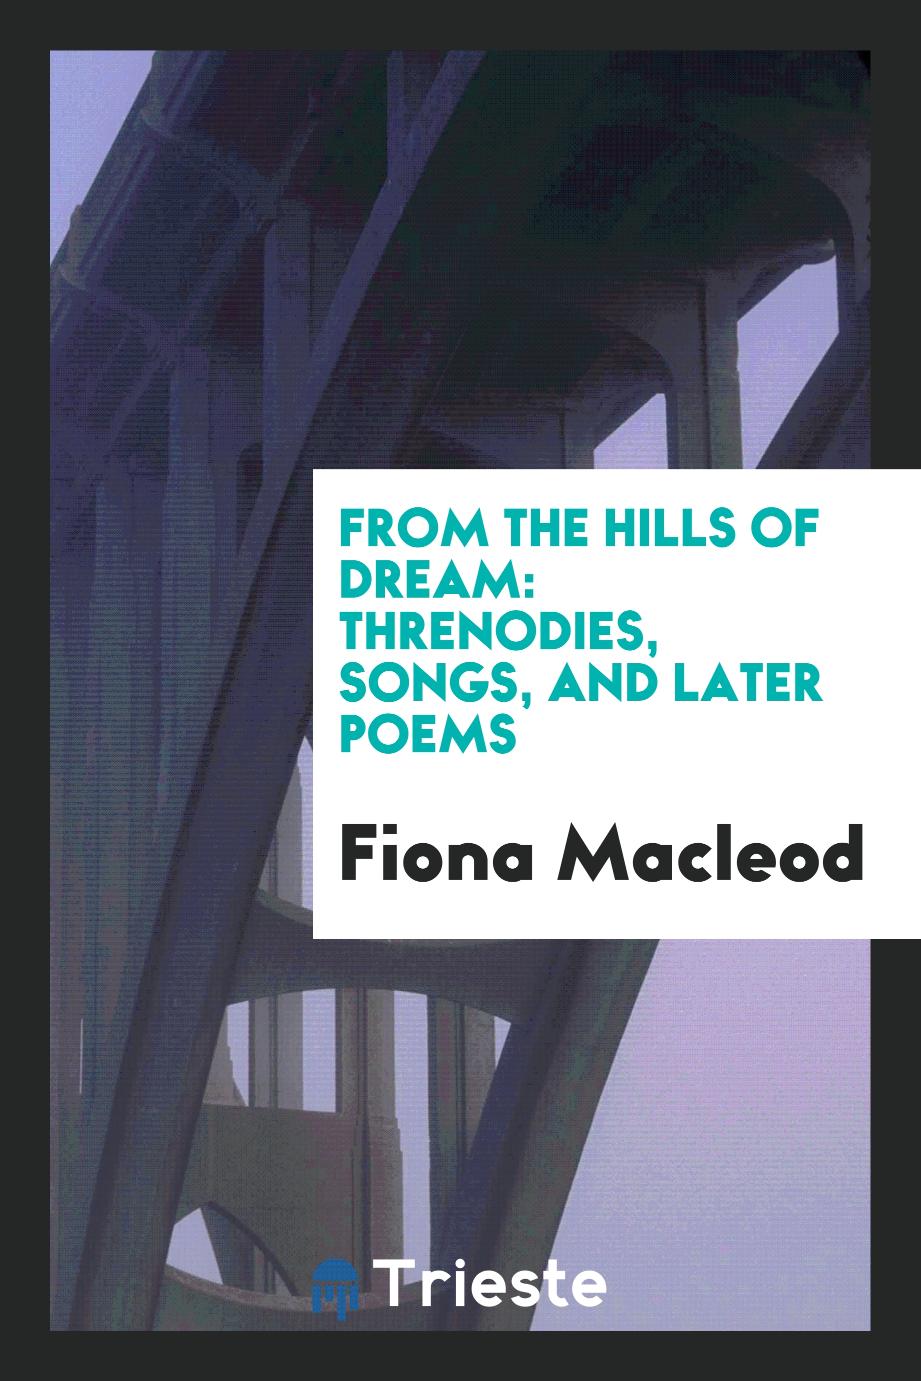 From the hills of dream: threnodies, songs, and later poems